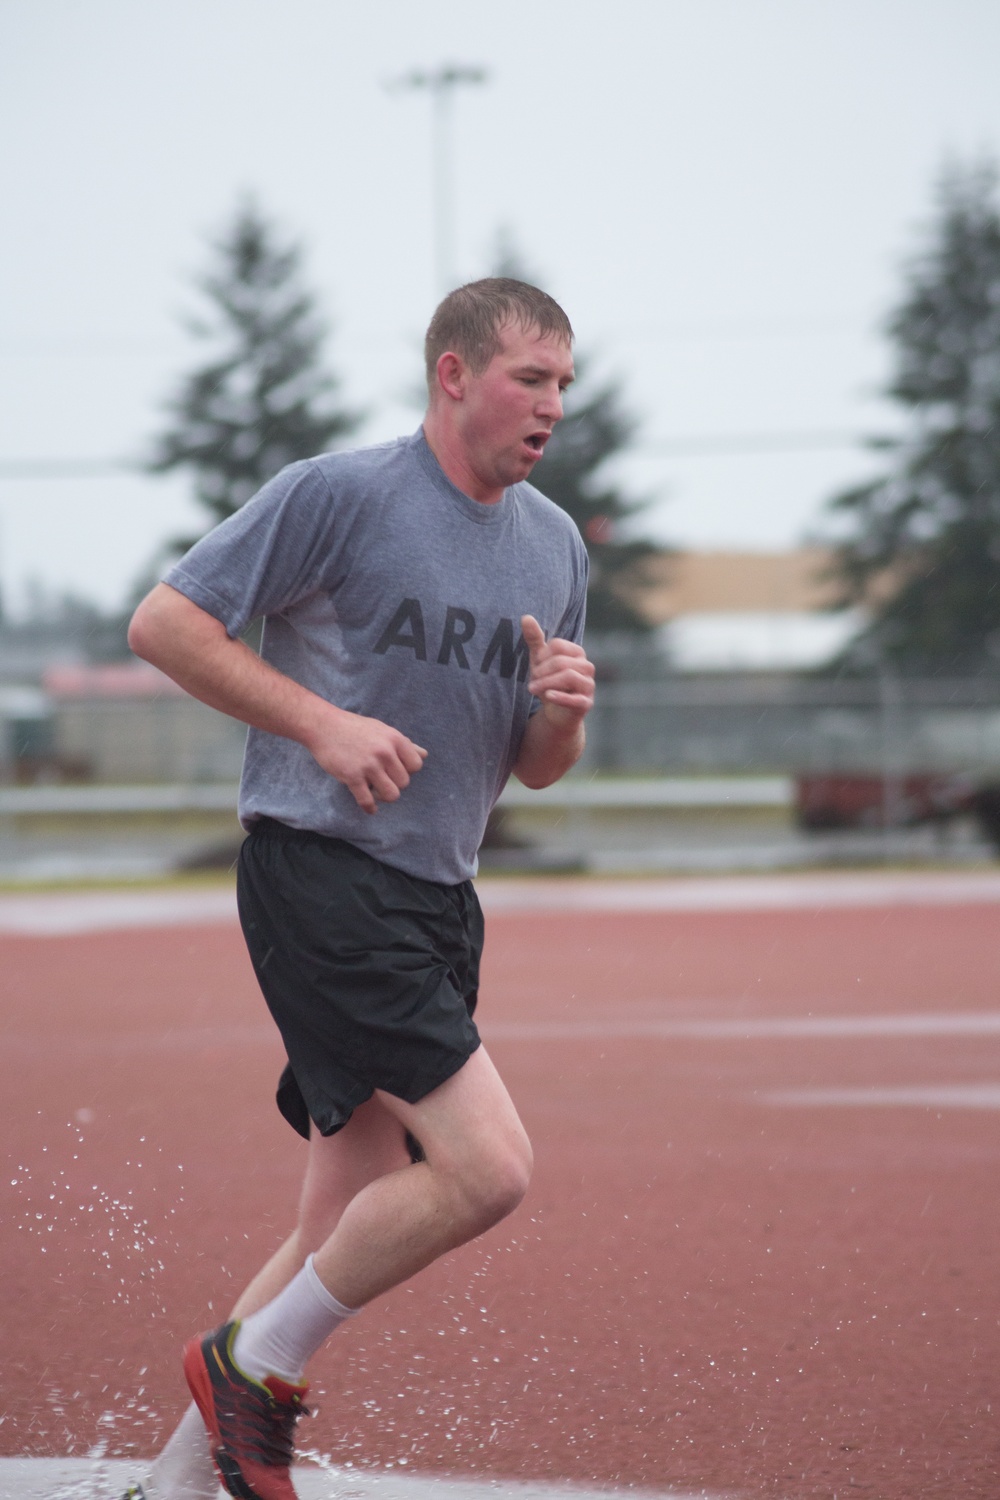 Spc. Christopher R. Williams races towards the finish line of the 2-mile run portion of the Army Physical Fitness Test, during the 301st Maneuver Enhancement Brigade Best Warrior Competition